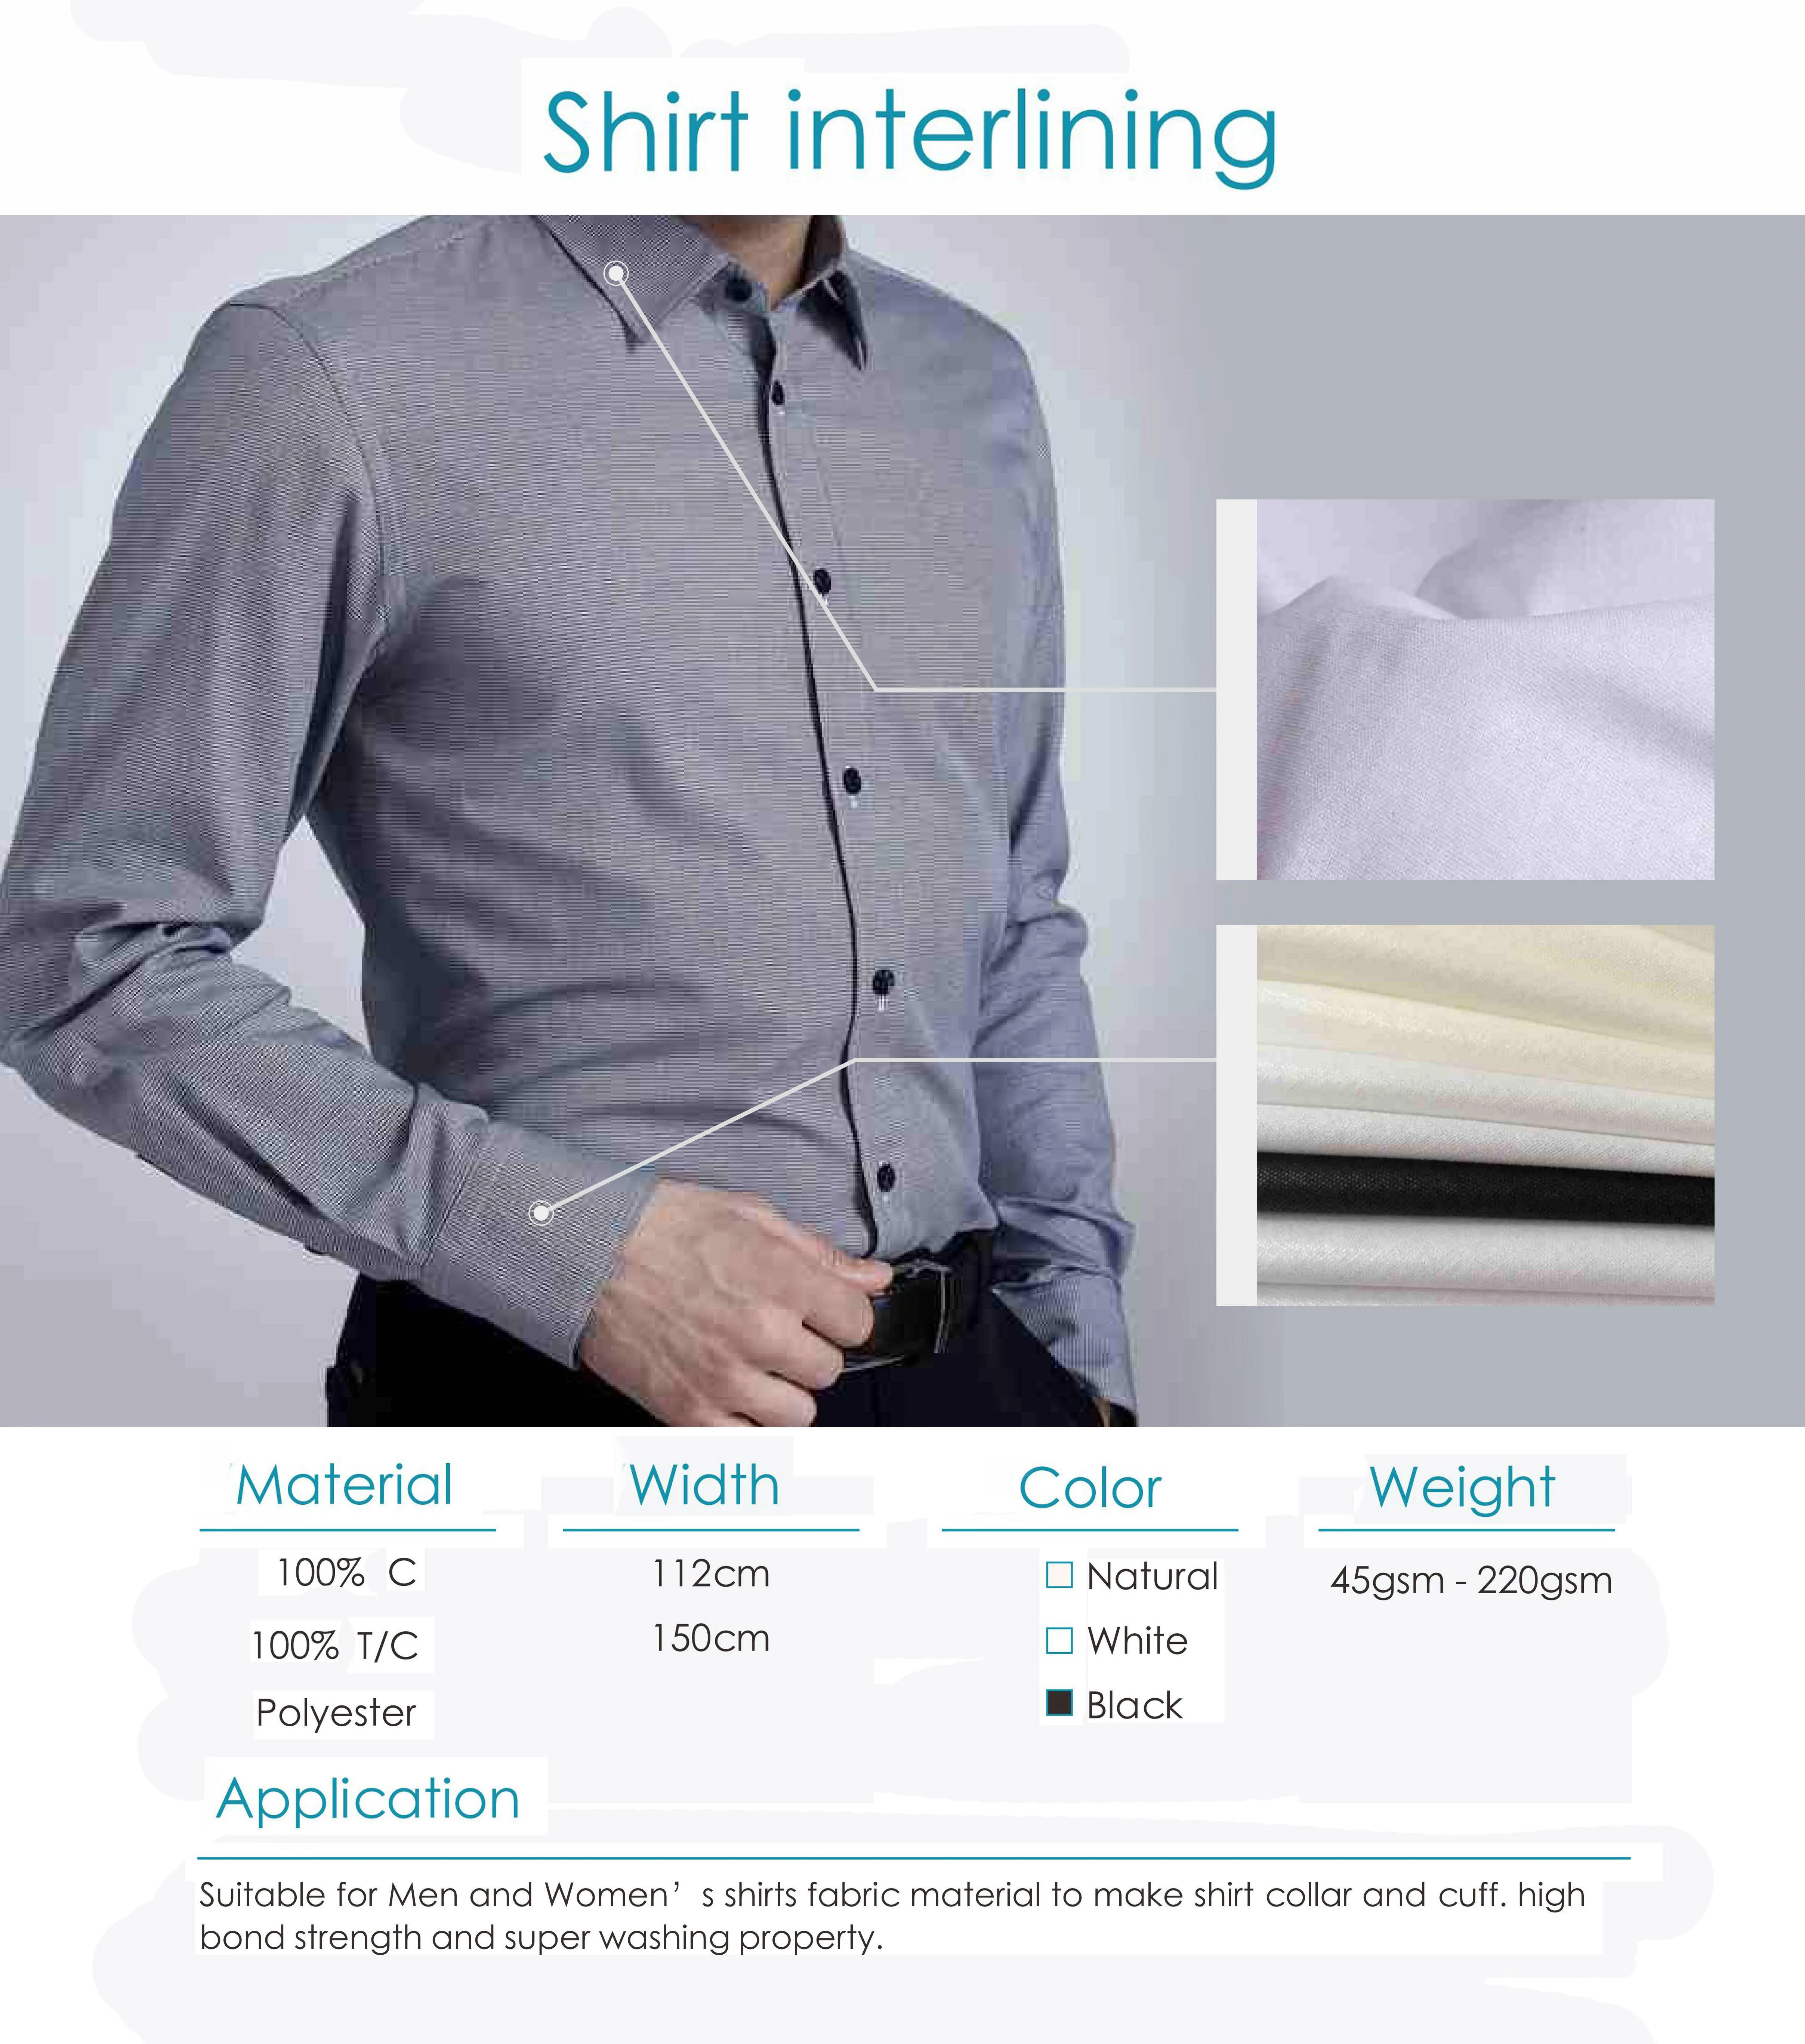 100% cotton fusible interlining for shirts Anti-wrinkle business shirt